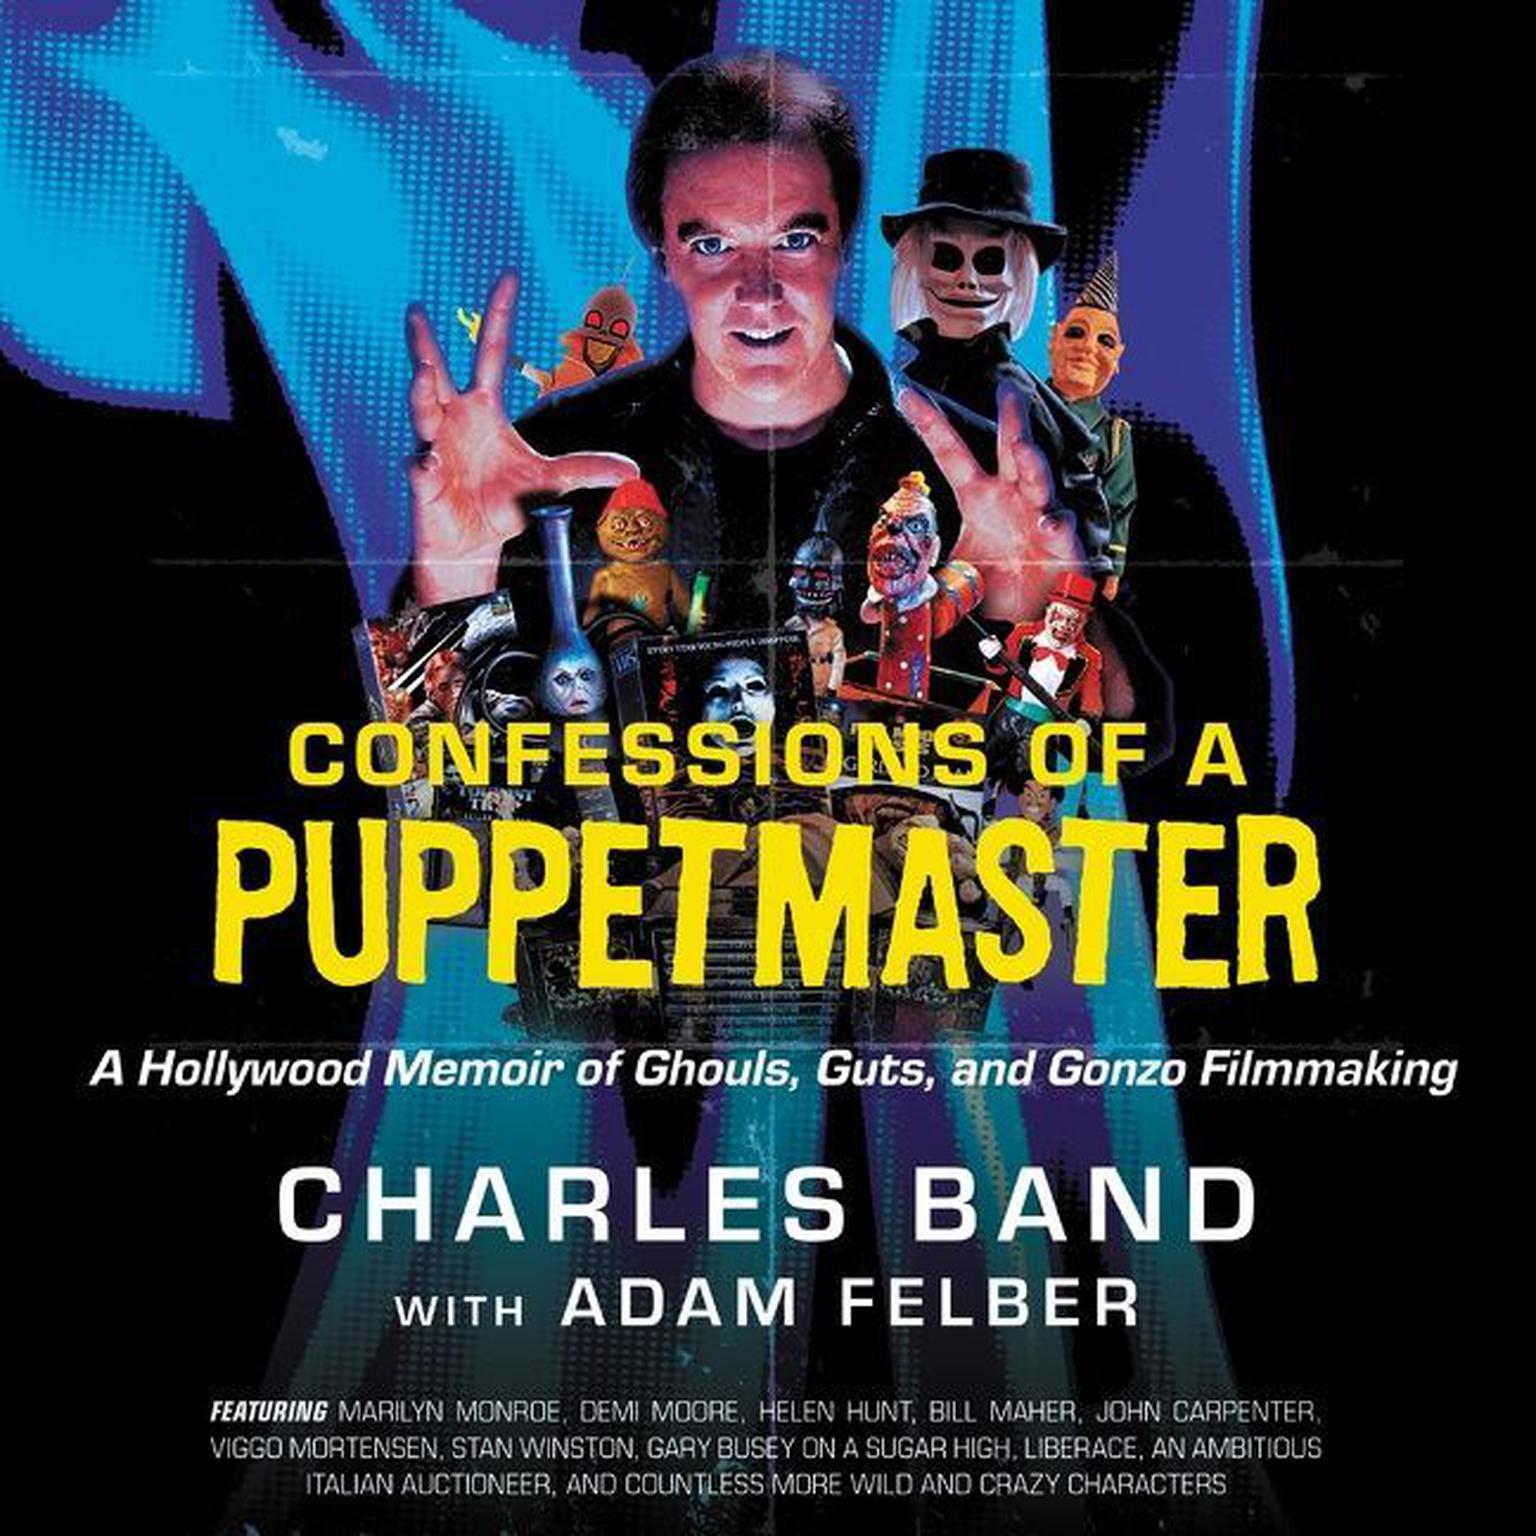 Confessions of a Puppetmaster: A Hollywood Memoir of Ghouls, Guts, and Gonzo Filmmaking Audiobook, by Charles Band